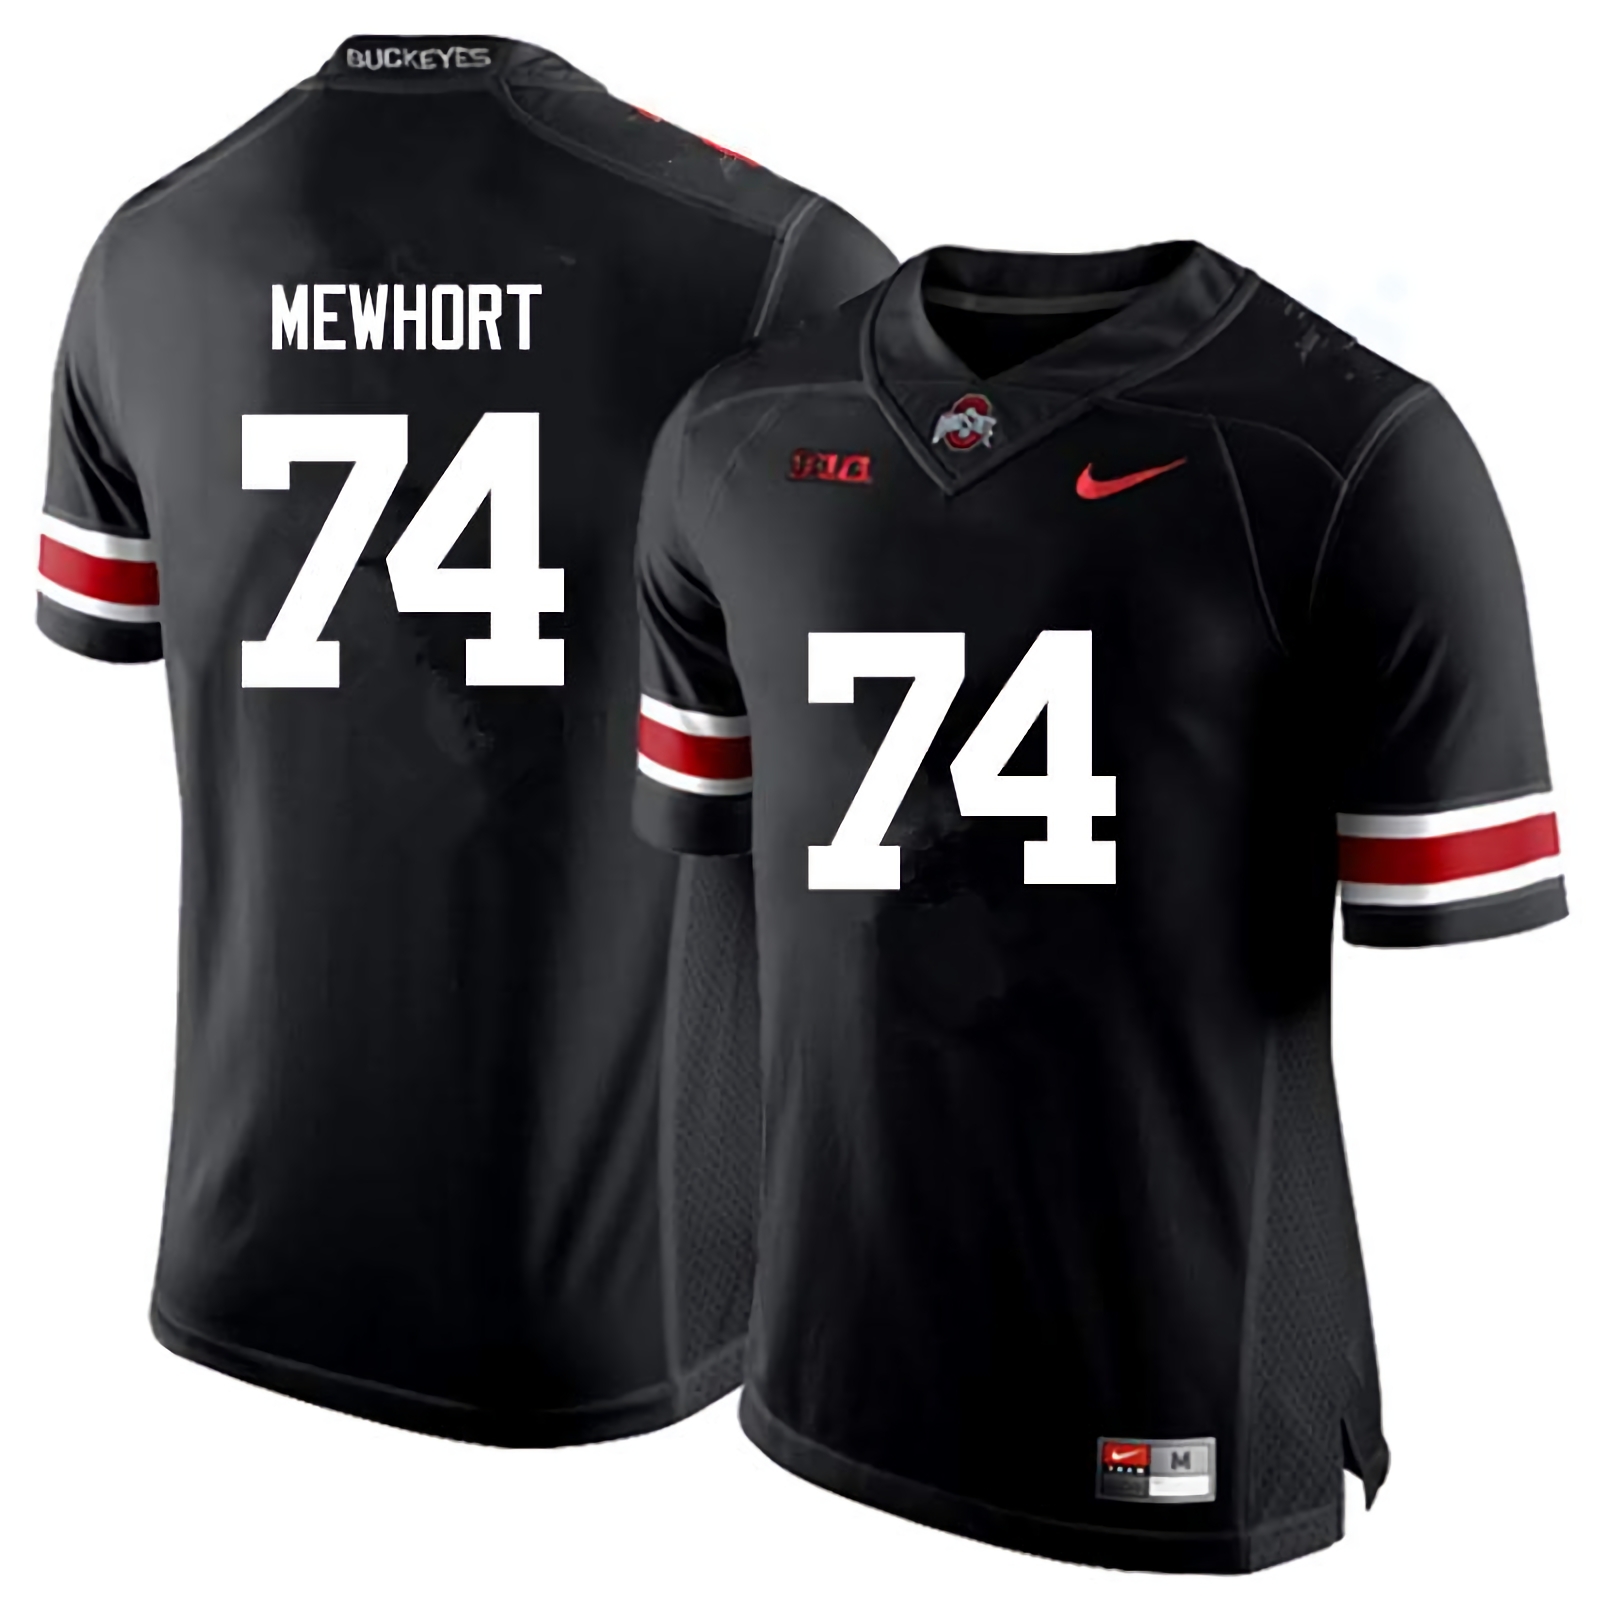 Jack Mewhort Ohio State Buckeyes Men's NCAA #74 Nike Black College Stitched Football Jersey MGK7456LM